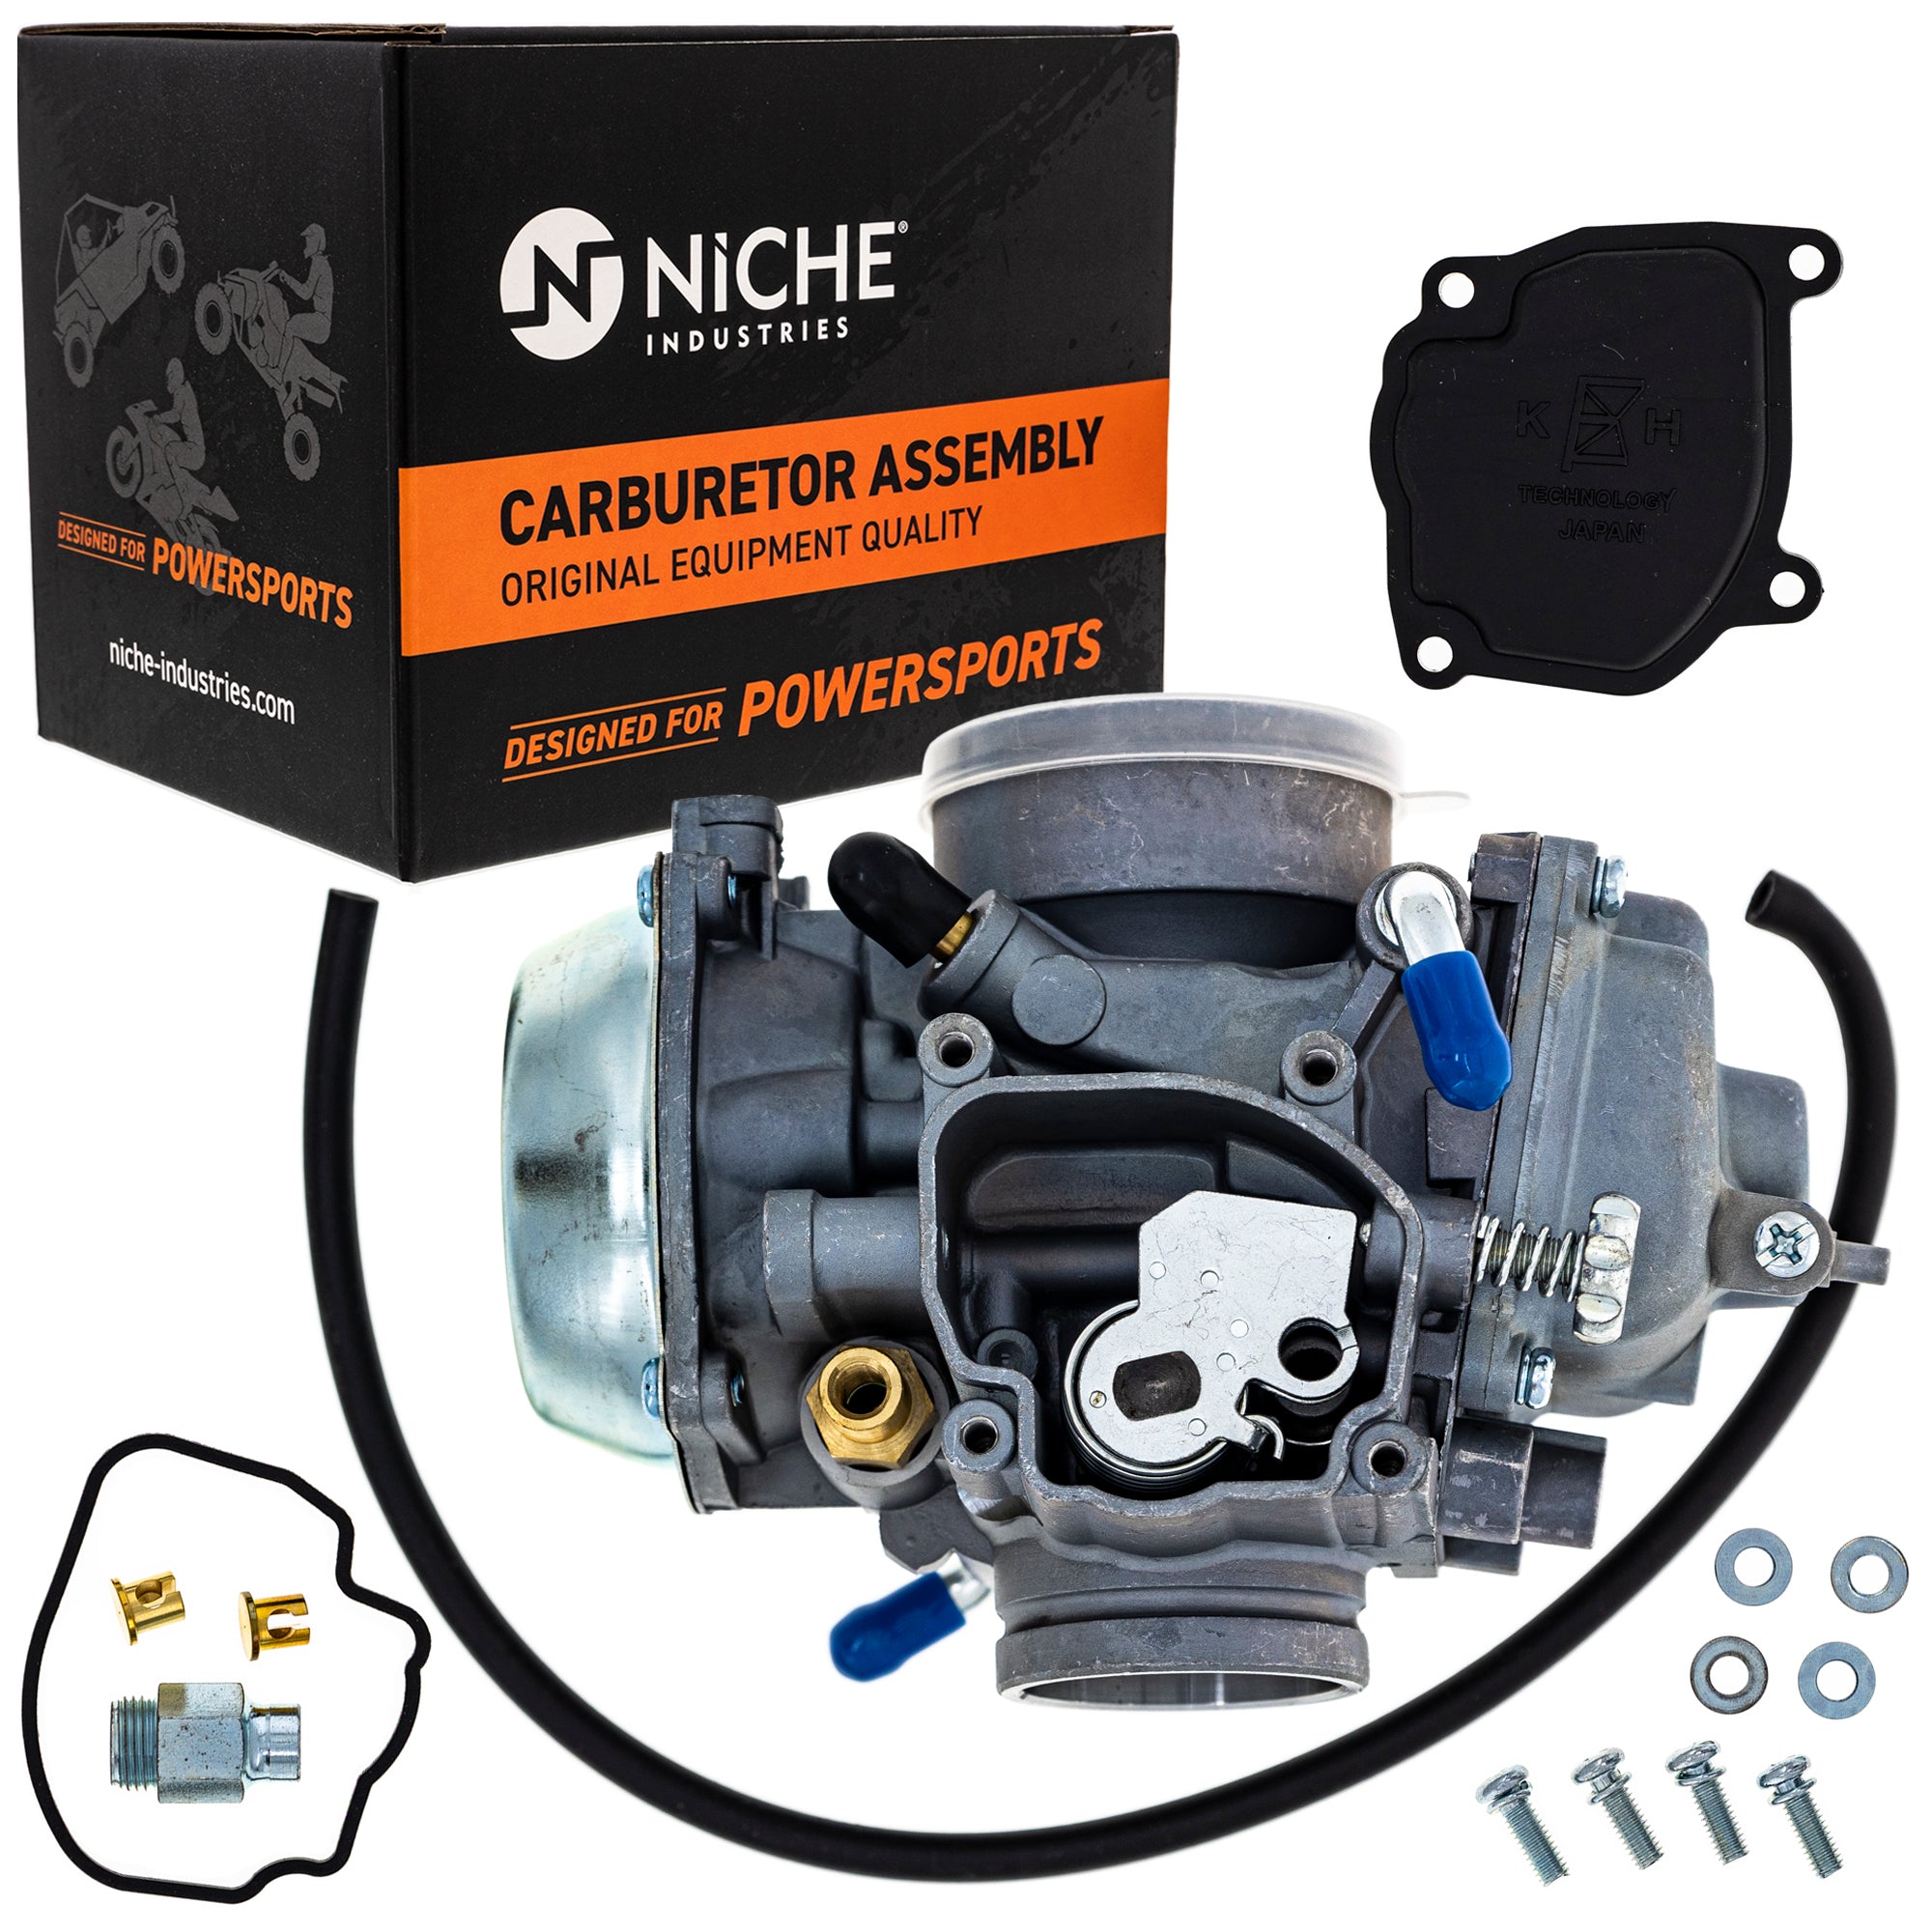 NICHE 519-KCR2289B Carburetor Assembly for zOTHER Polaris Trail